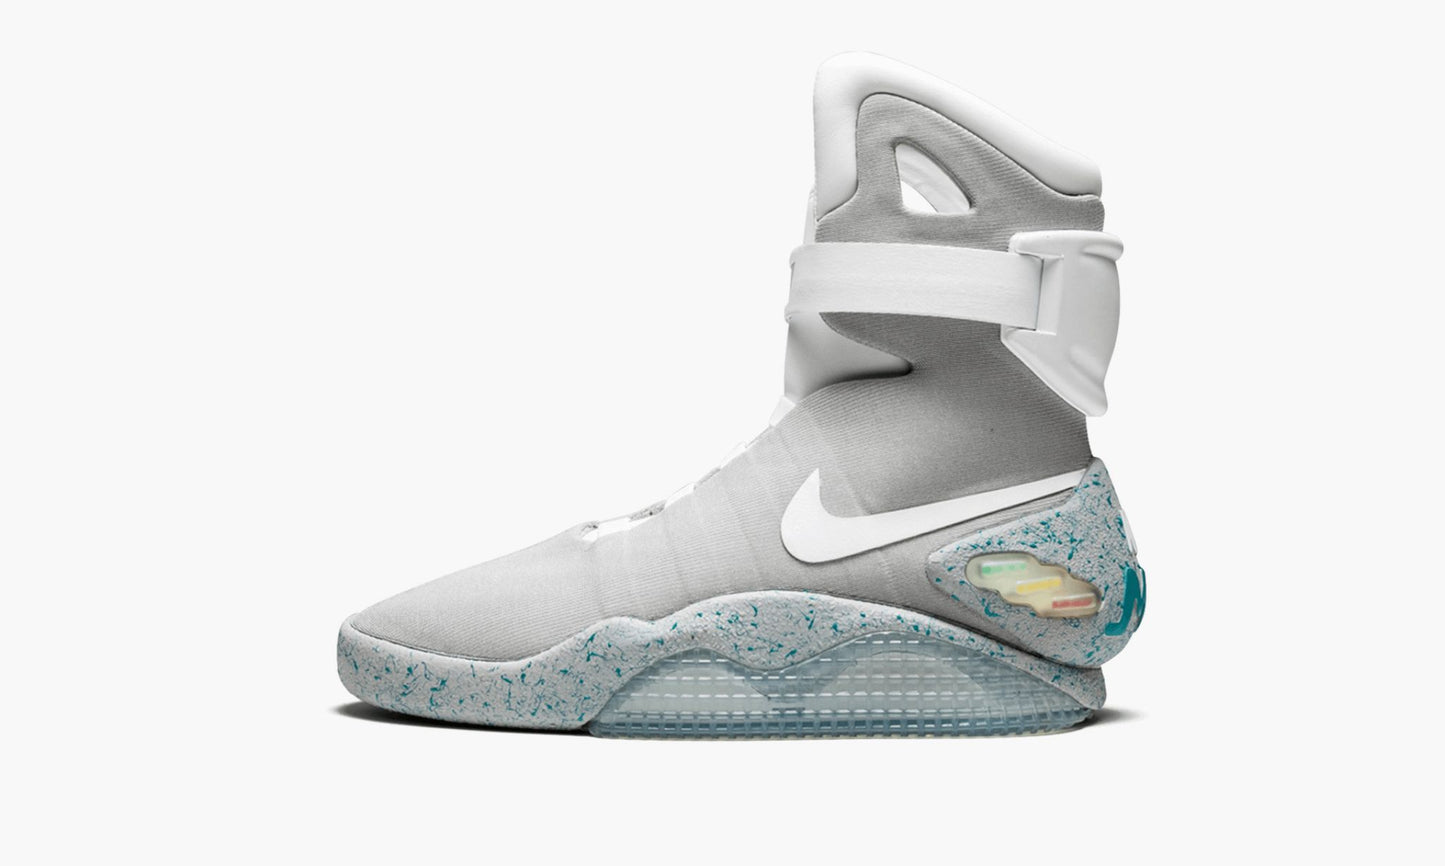 Nike Air Mag "Back To The Future"